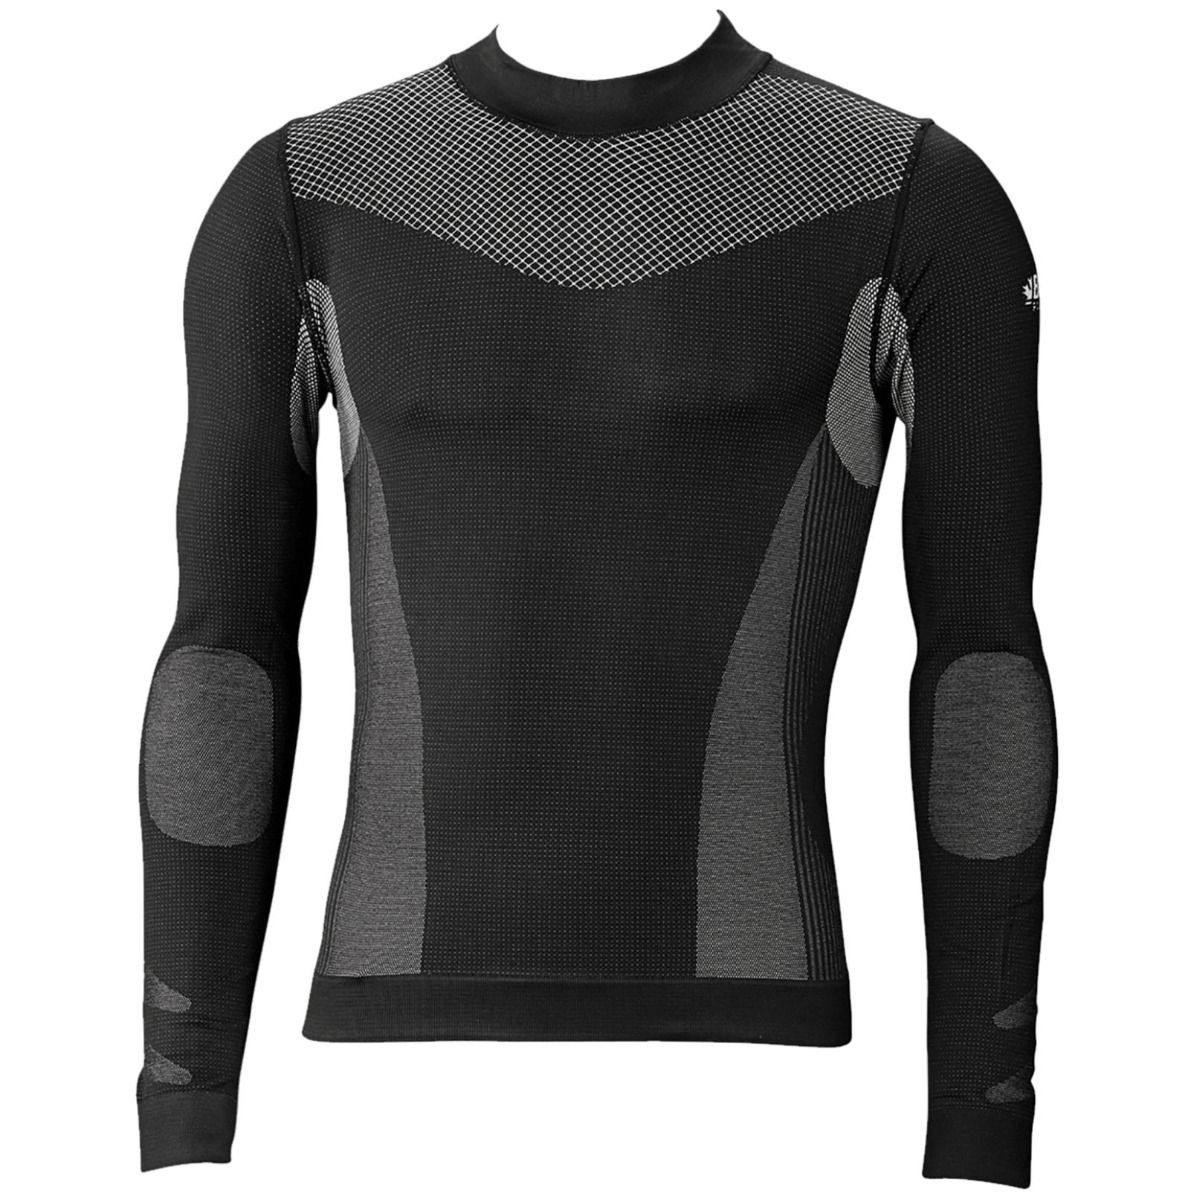 Baffin Base Layer Top in Charcoal